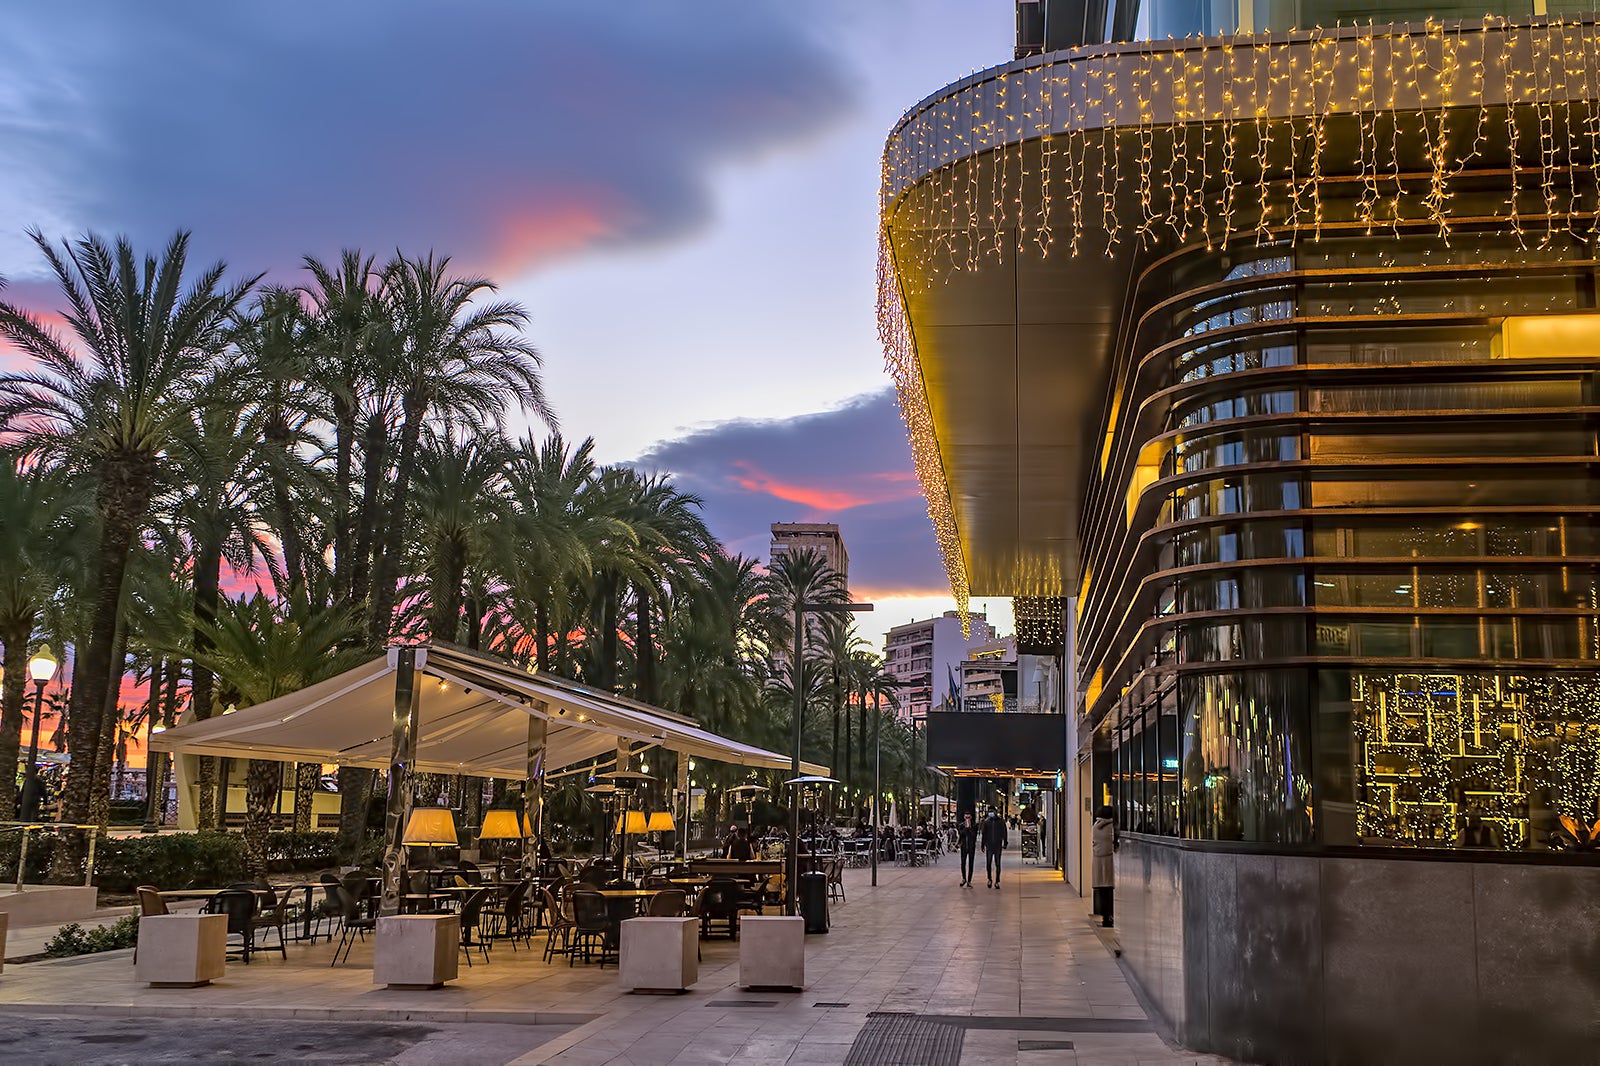 El Puerto: Port area of Alicante with beach bars, clubs and a popular casino